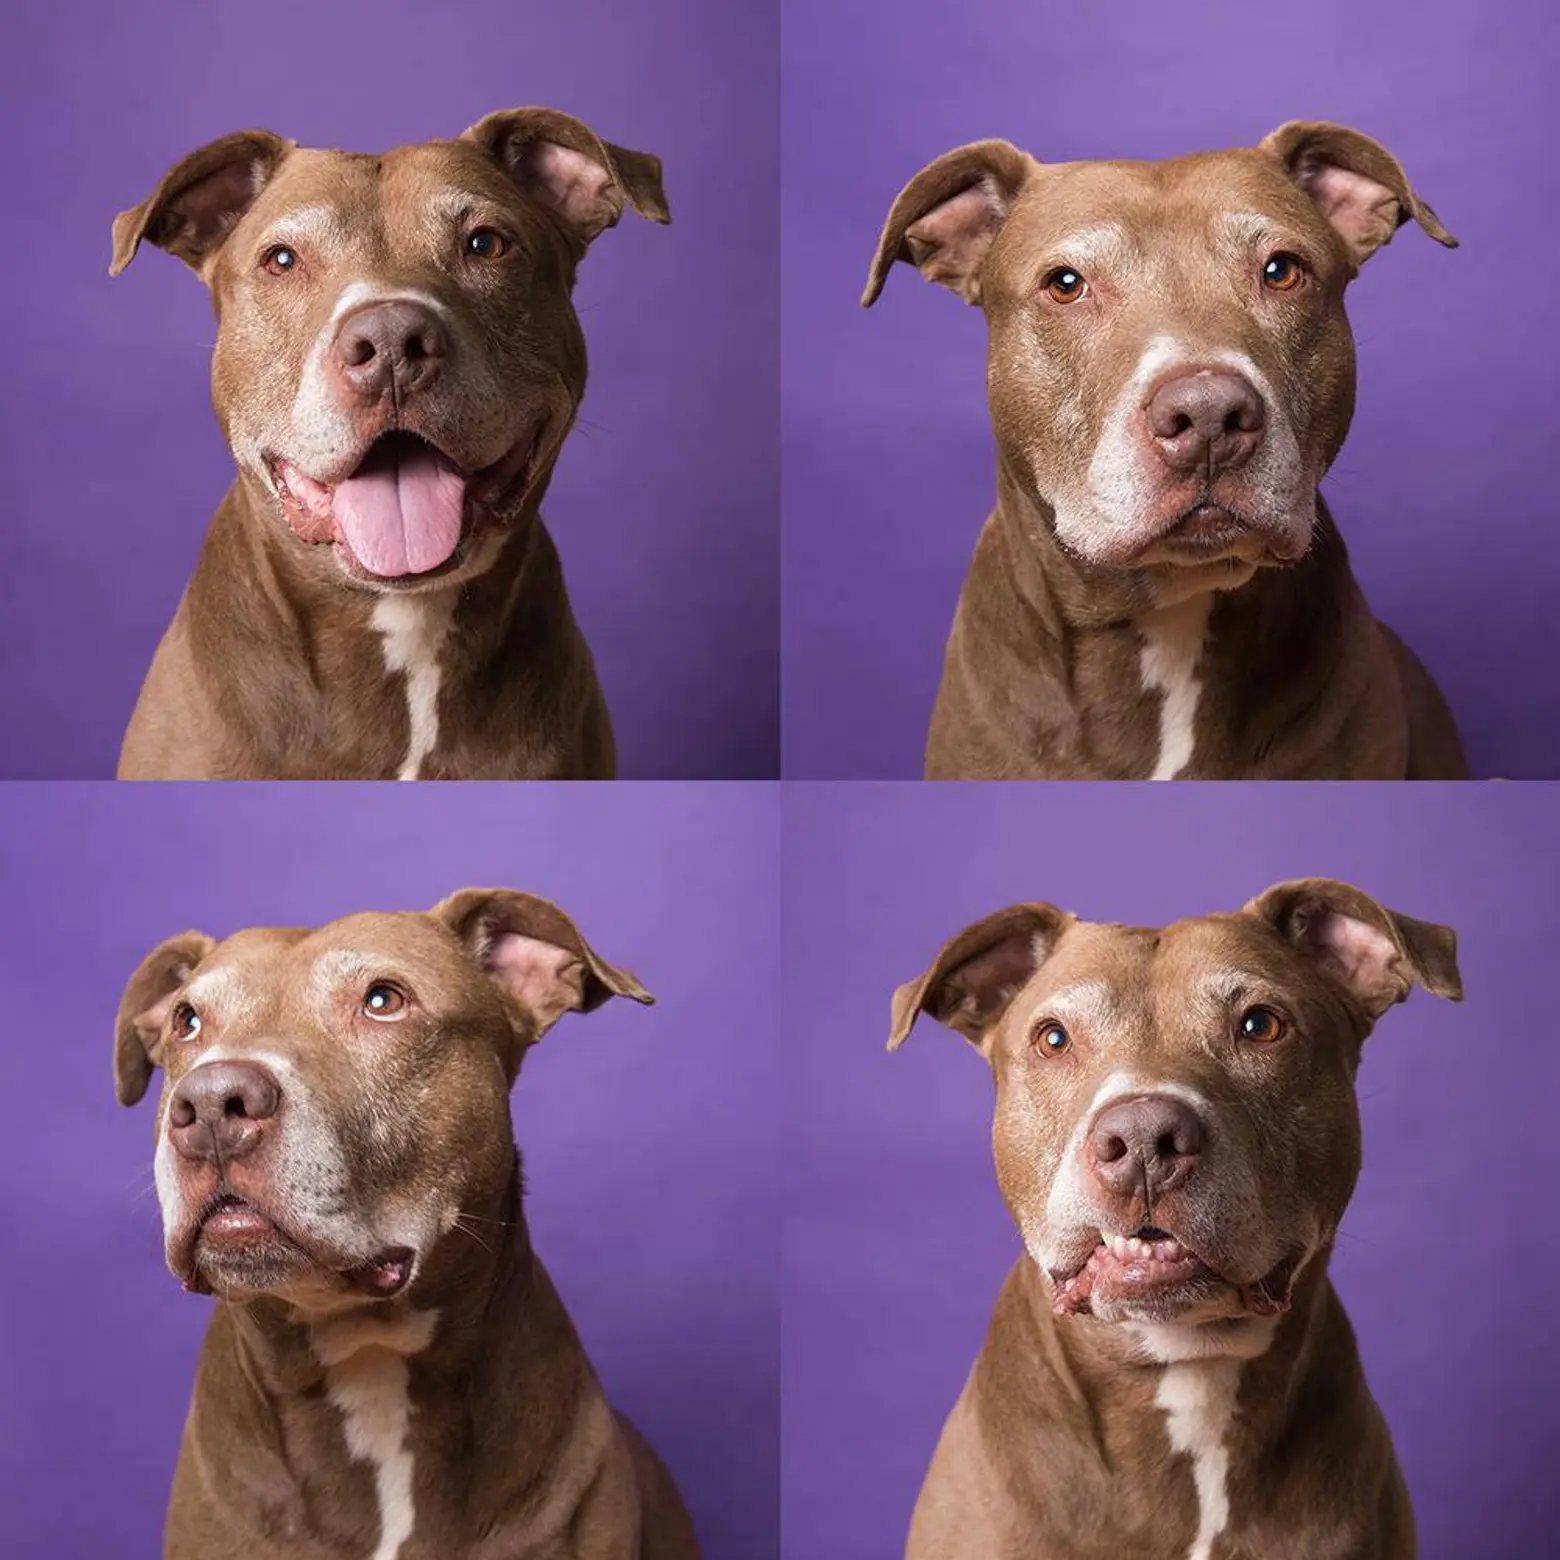 foster dogs nyc, adoptable dogs nyc, pit bull